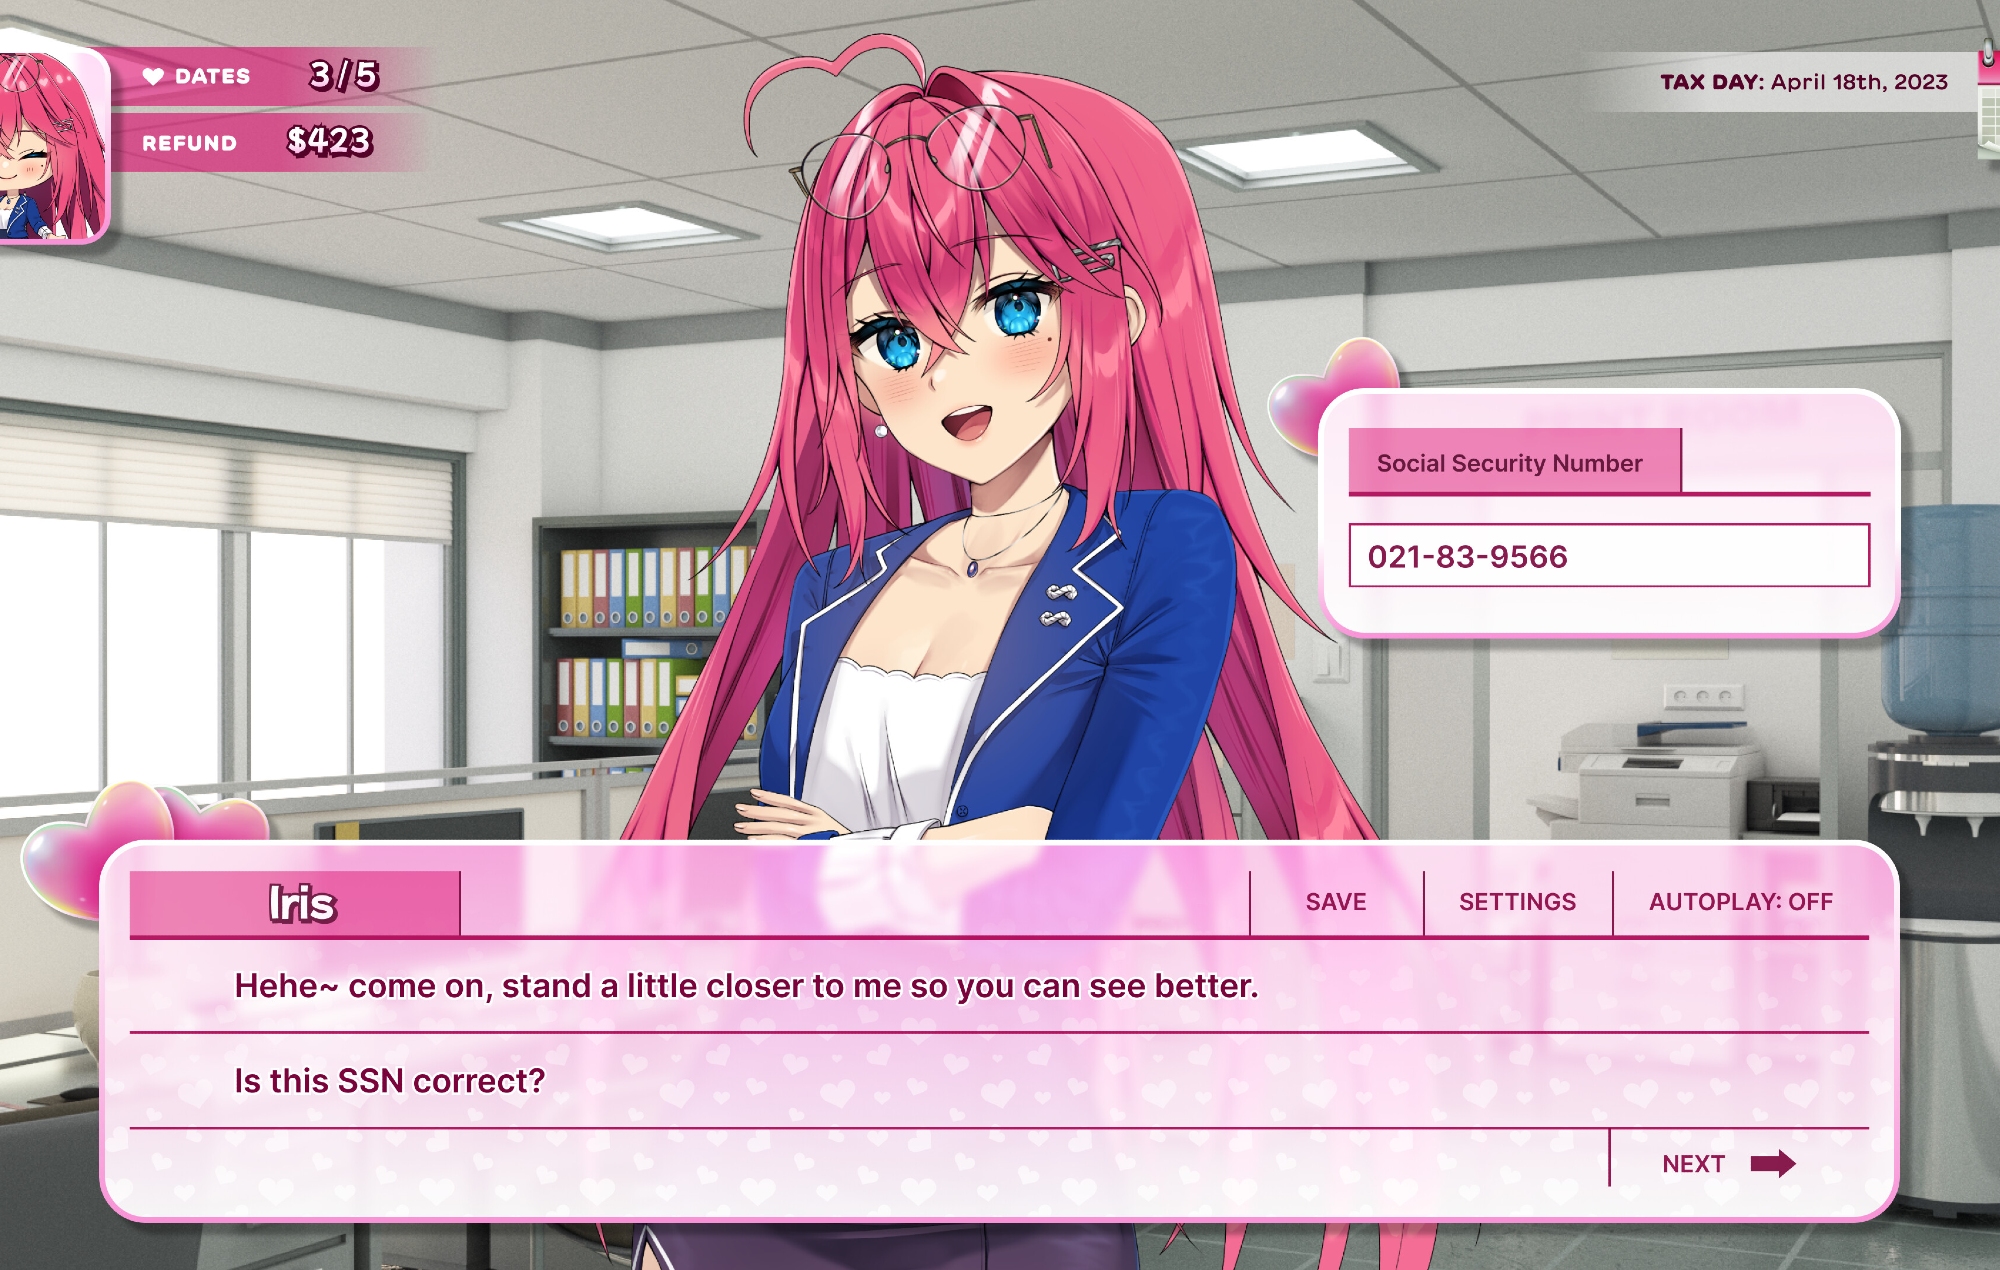 I played the anime dating sim that does your taxes for you | TechCrunch